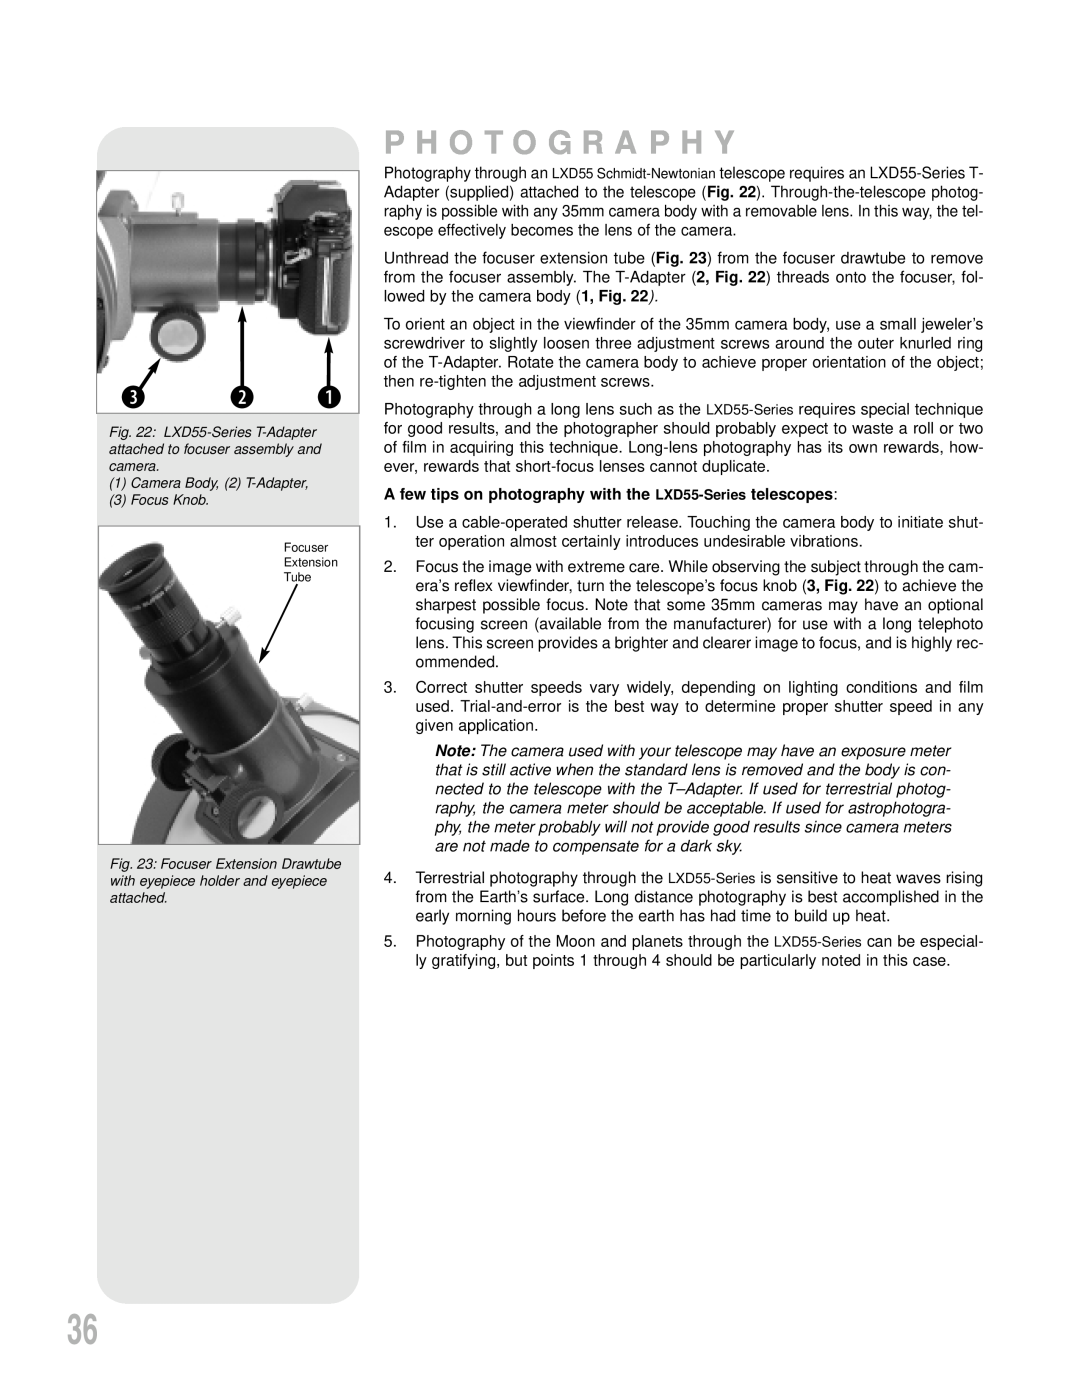 Meade instruction manual d C B, Photography, A few tips on photography with the LXD55-Series telescopes 